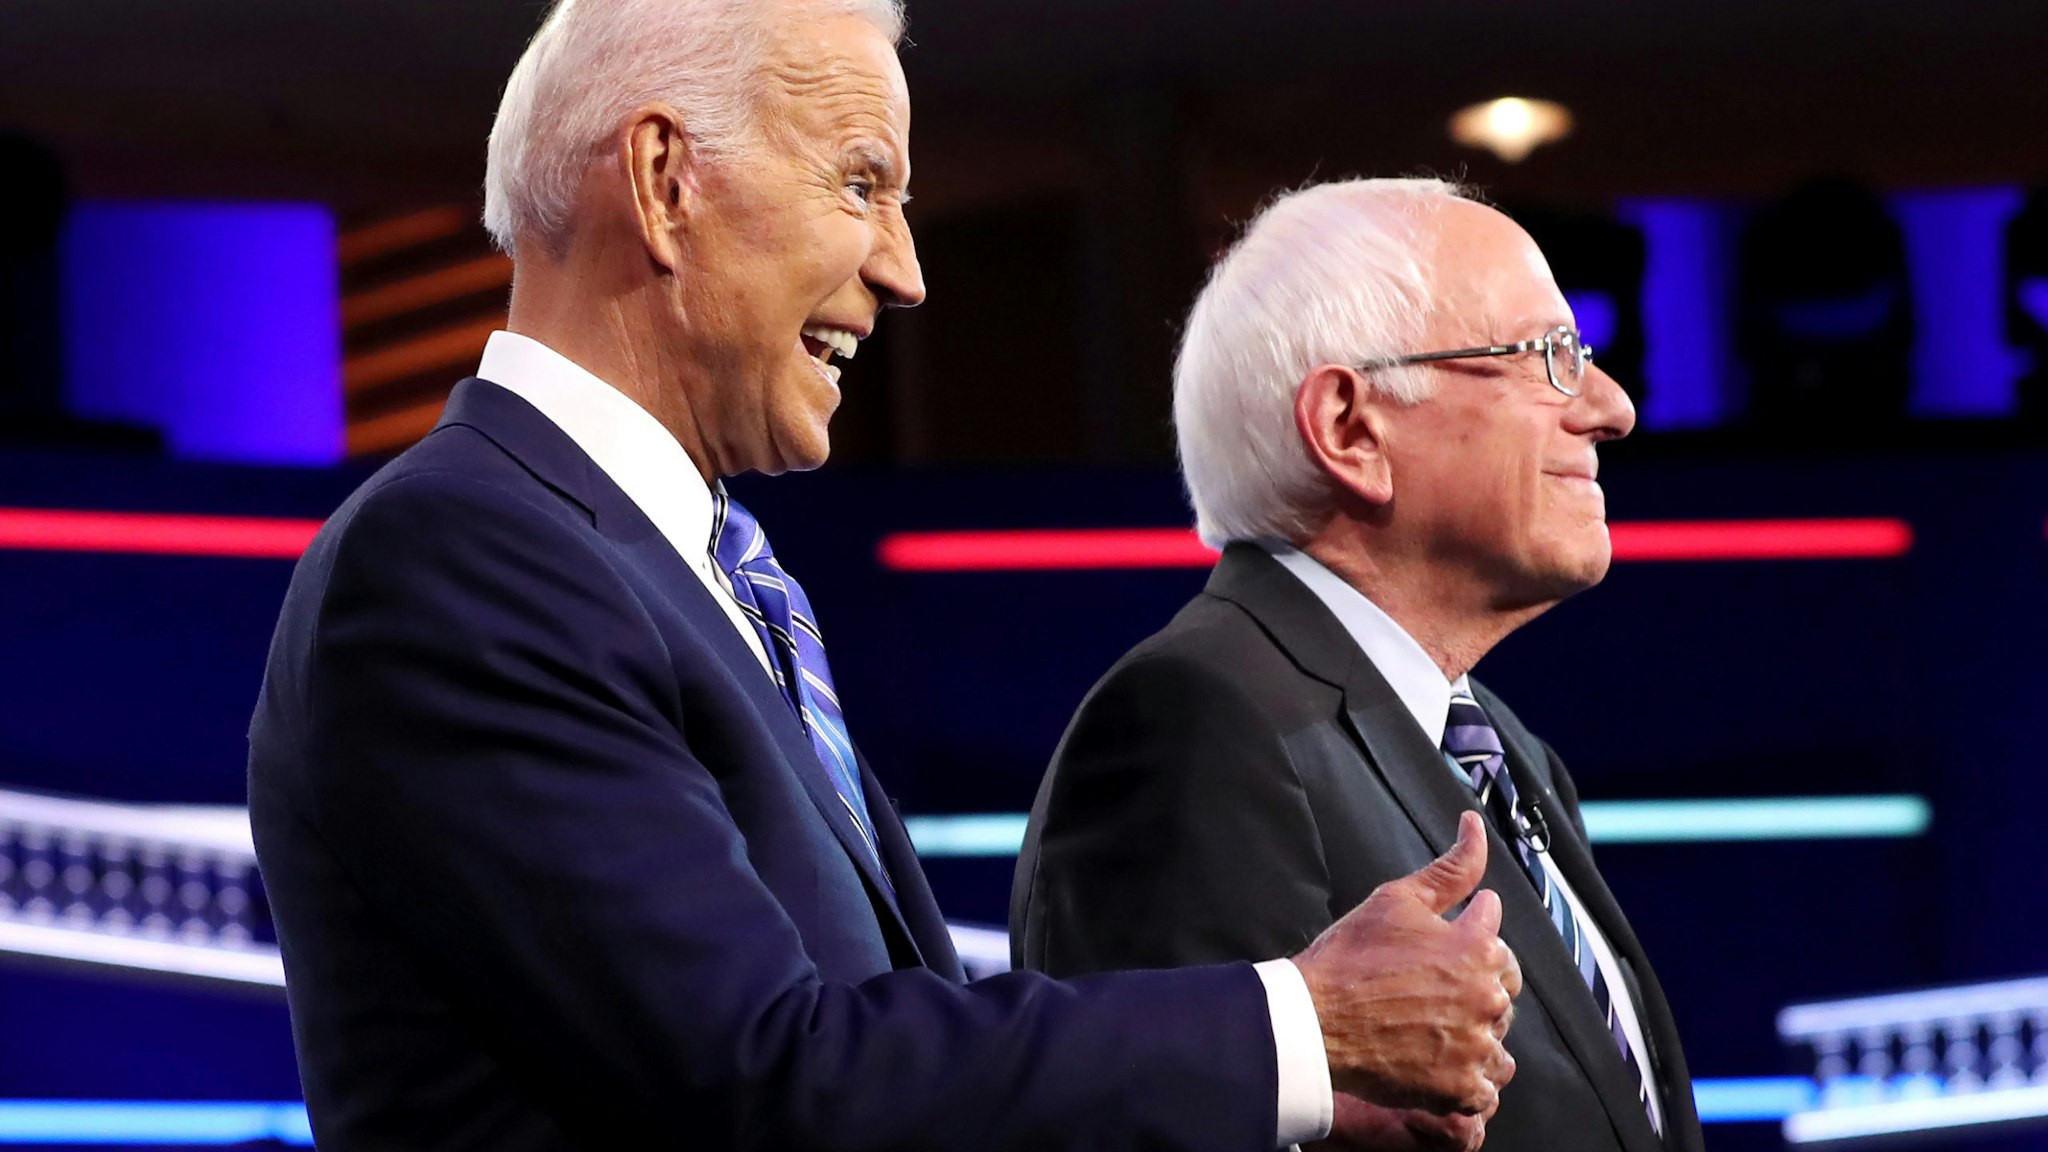 MIAMI, FLORIDA - JUNE 27: former Vice President Joe Biden and Sen. Bernie Sanders (I-VT) take the stage for the second night of the first Democratic presidential debate on June 27, 2019 in Miami, Florida. A field of 20 Democratic presidential candidates was split into two groups of 10 for the first debate of the 2020 election, taking place over two nights at Knight Concert Hall of the Adrienne Arsht Center for the Performing Arts of Miami-Dade County, hosted by NBC News, MSNBC, and Telemundo.